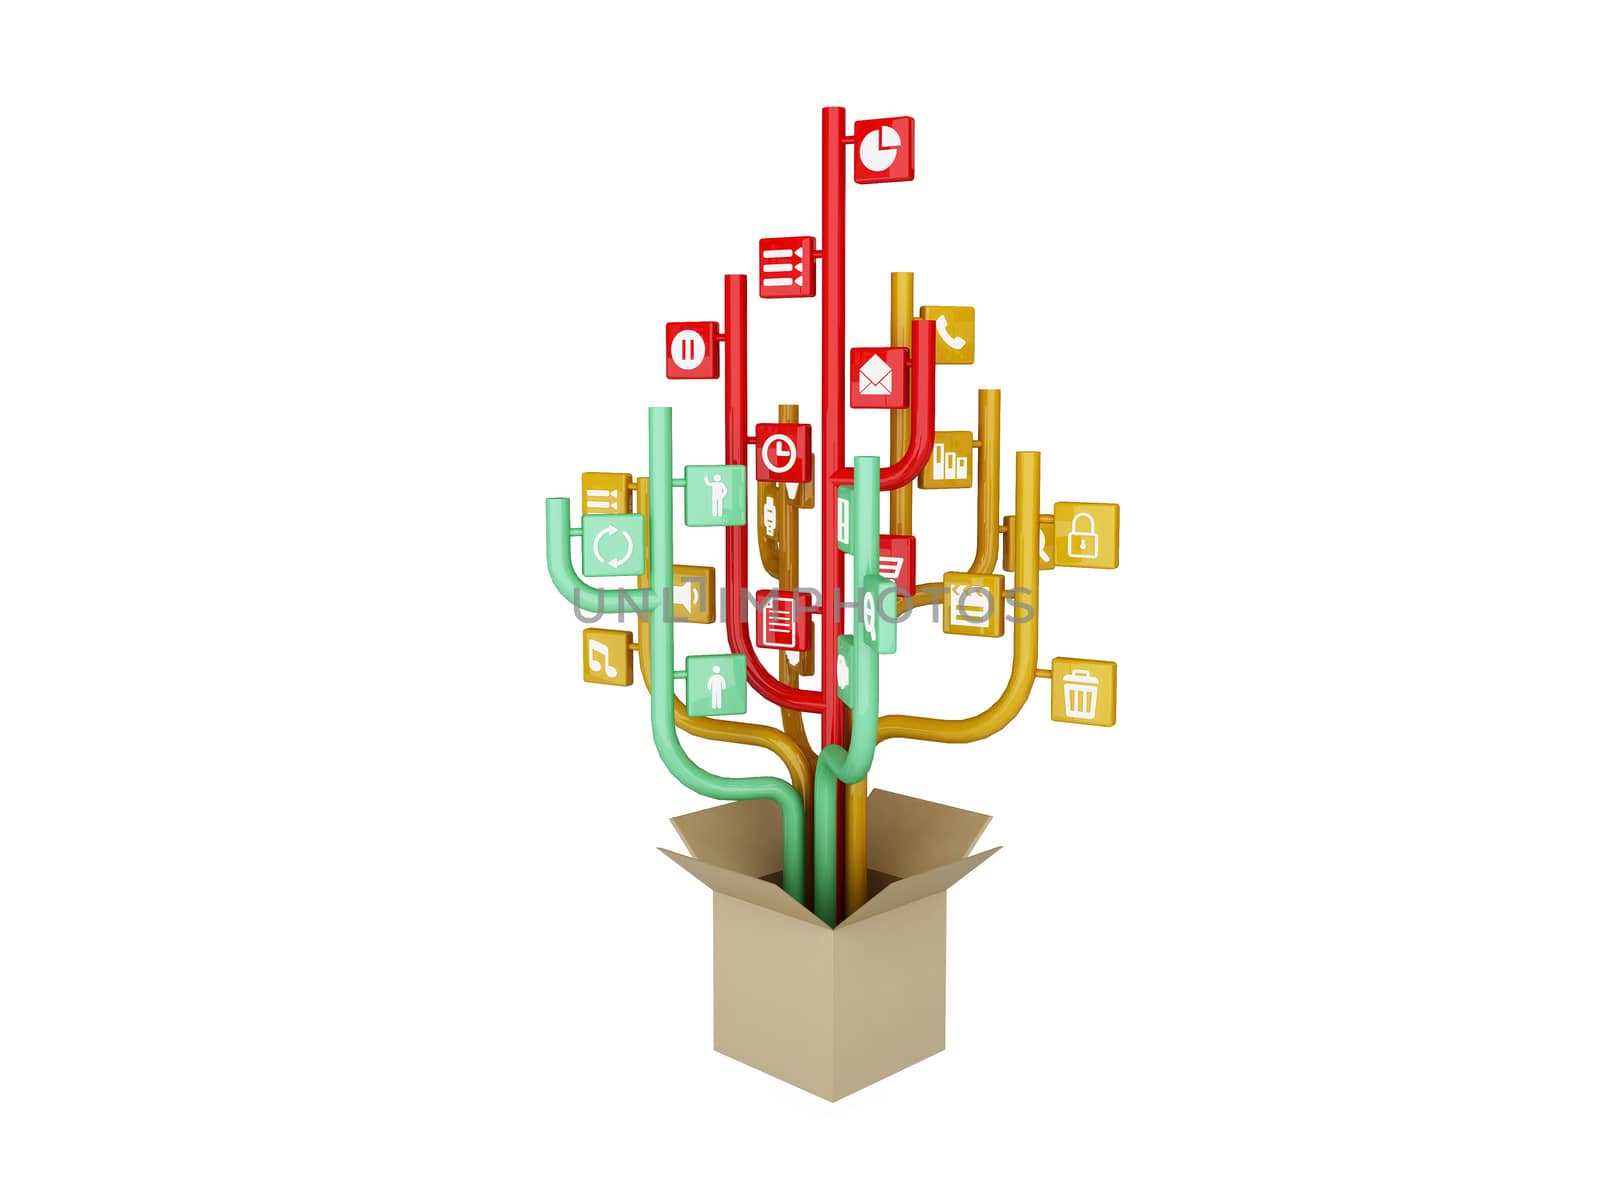 the tree consisting of the icons on the topic of social media. O by teerawit